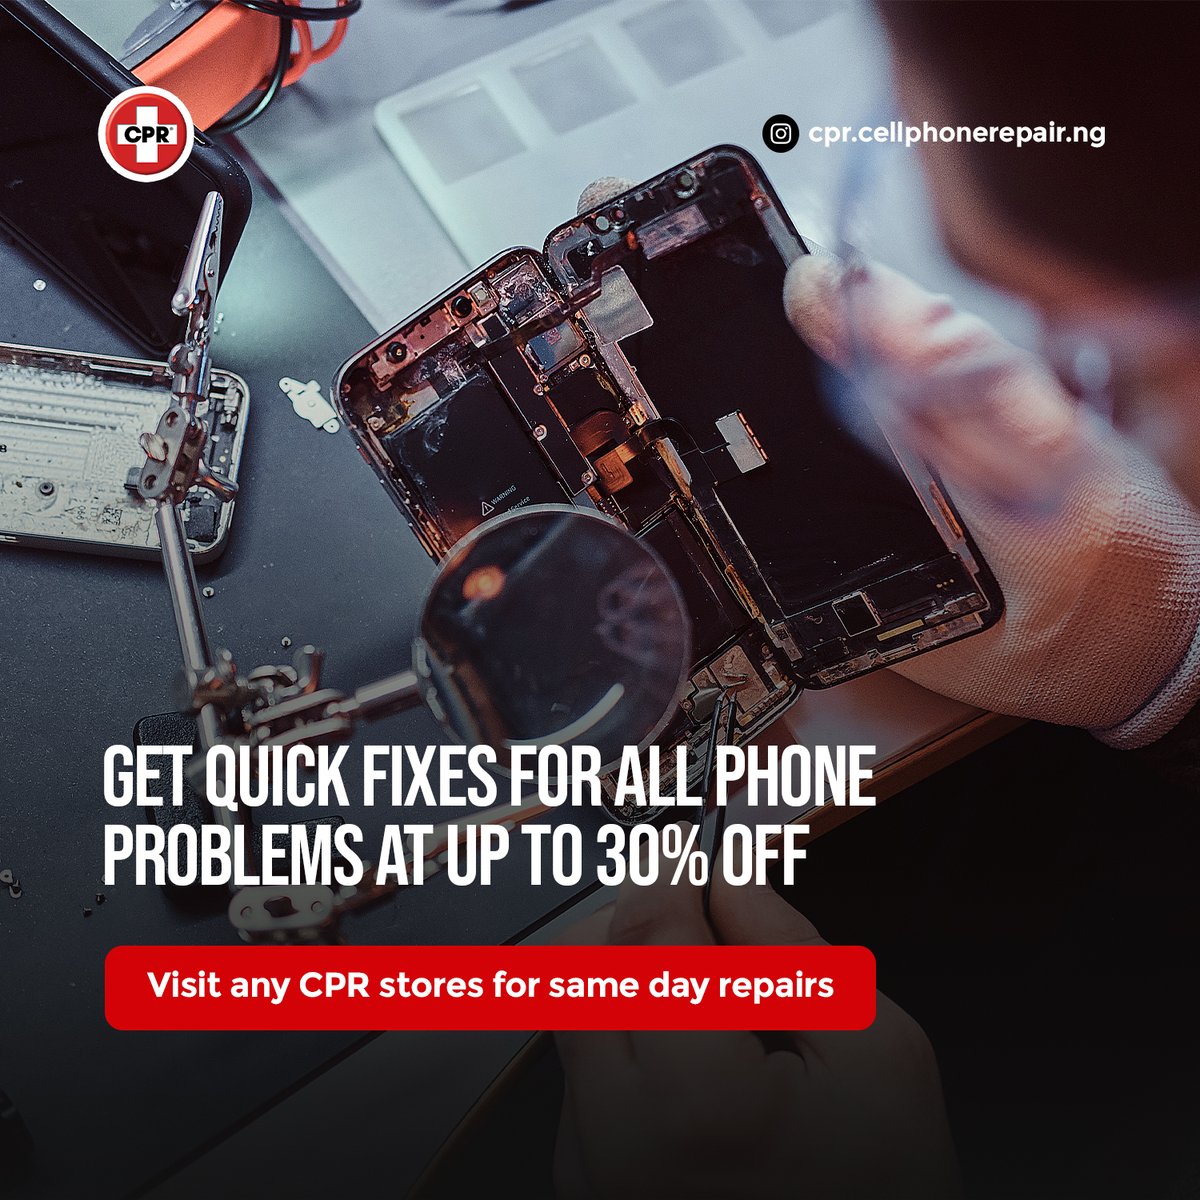 We are your go-to store for quick, reliable and quality repairs at discounted prices. Enjoy same-day or next-day phone repairs at our stores! #CPR #phonerepair #FridayVibes #samedayrepair #fastphonerepairs #thursdayvibes #nextdayrepair